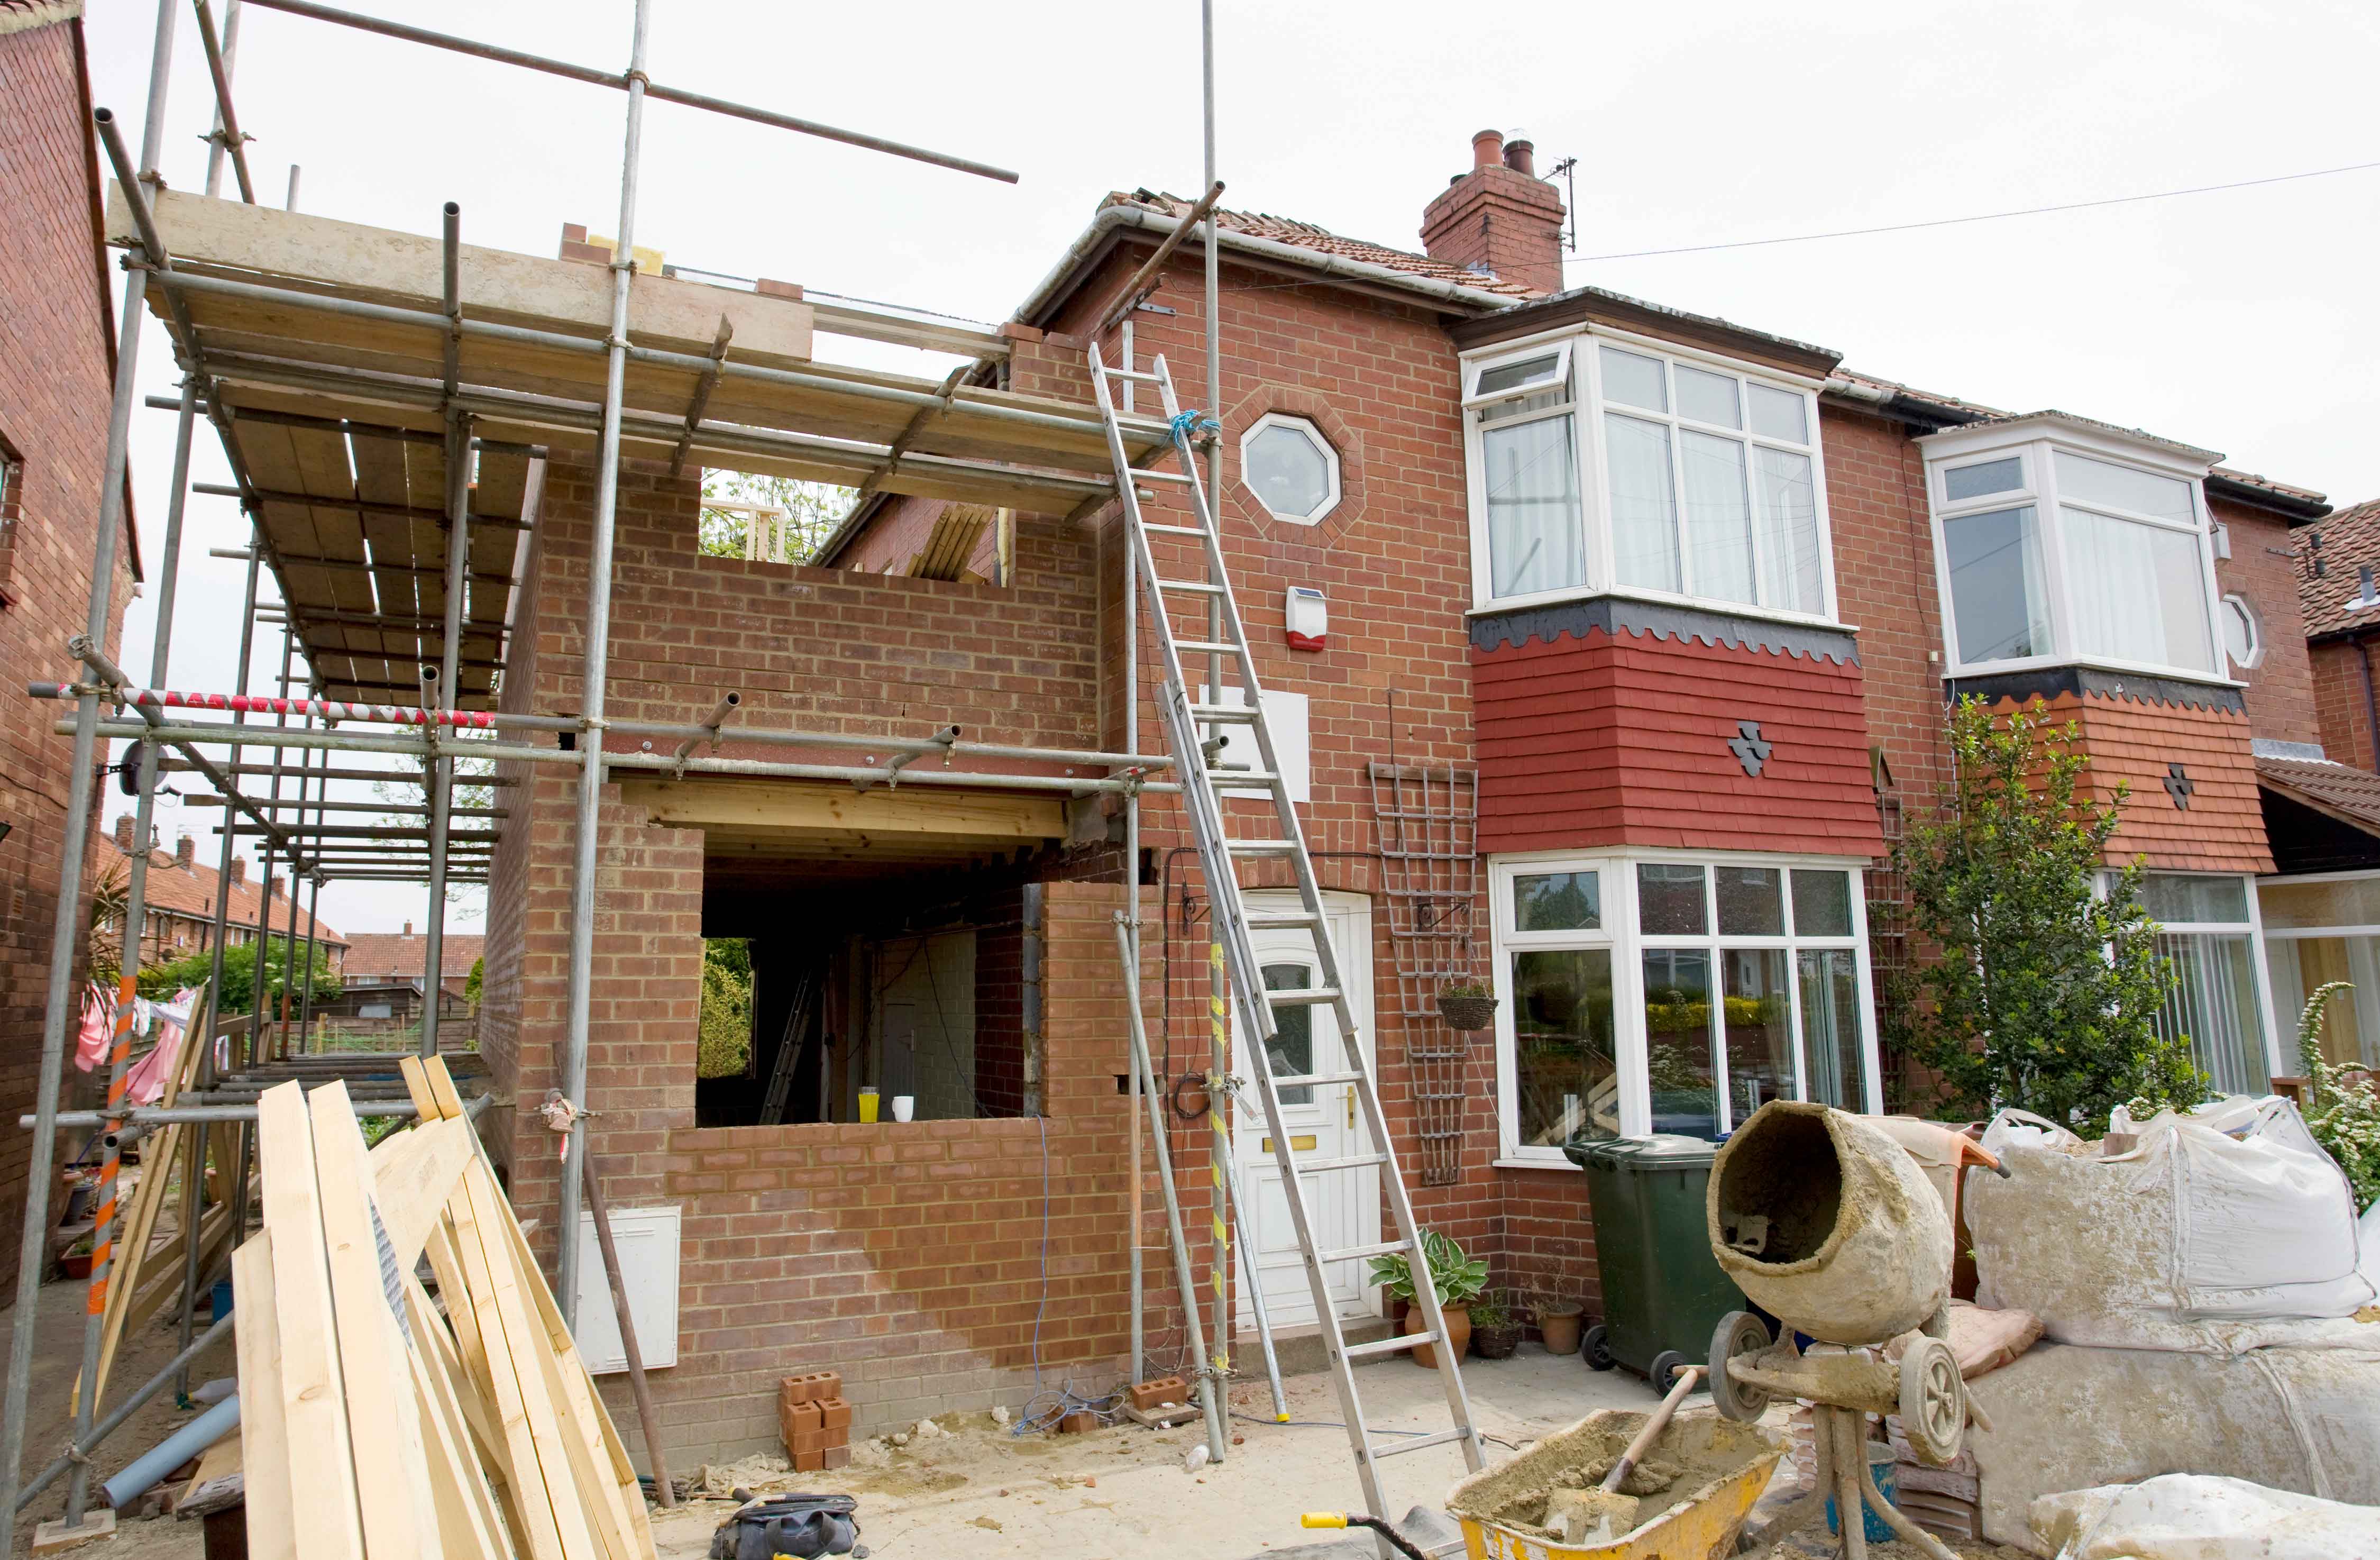 Remortgaging to fund a home extension